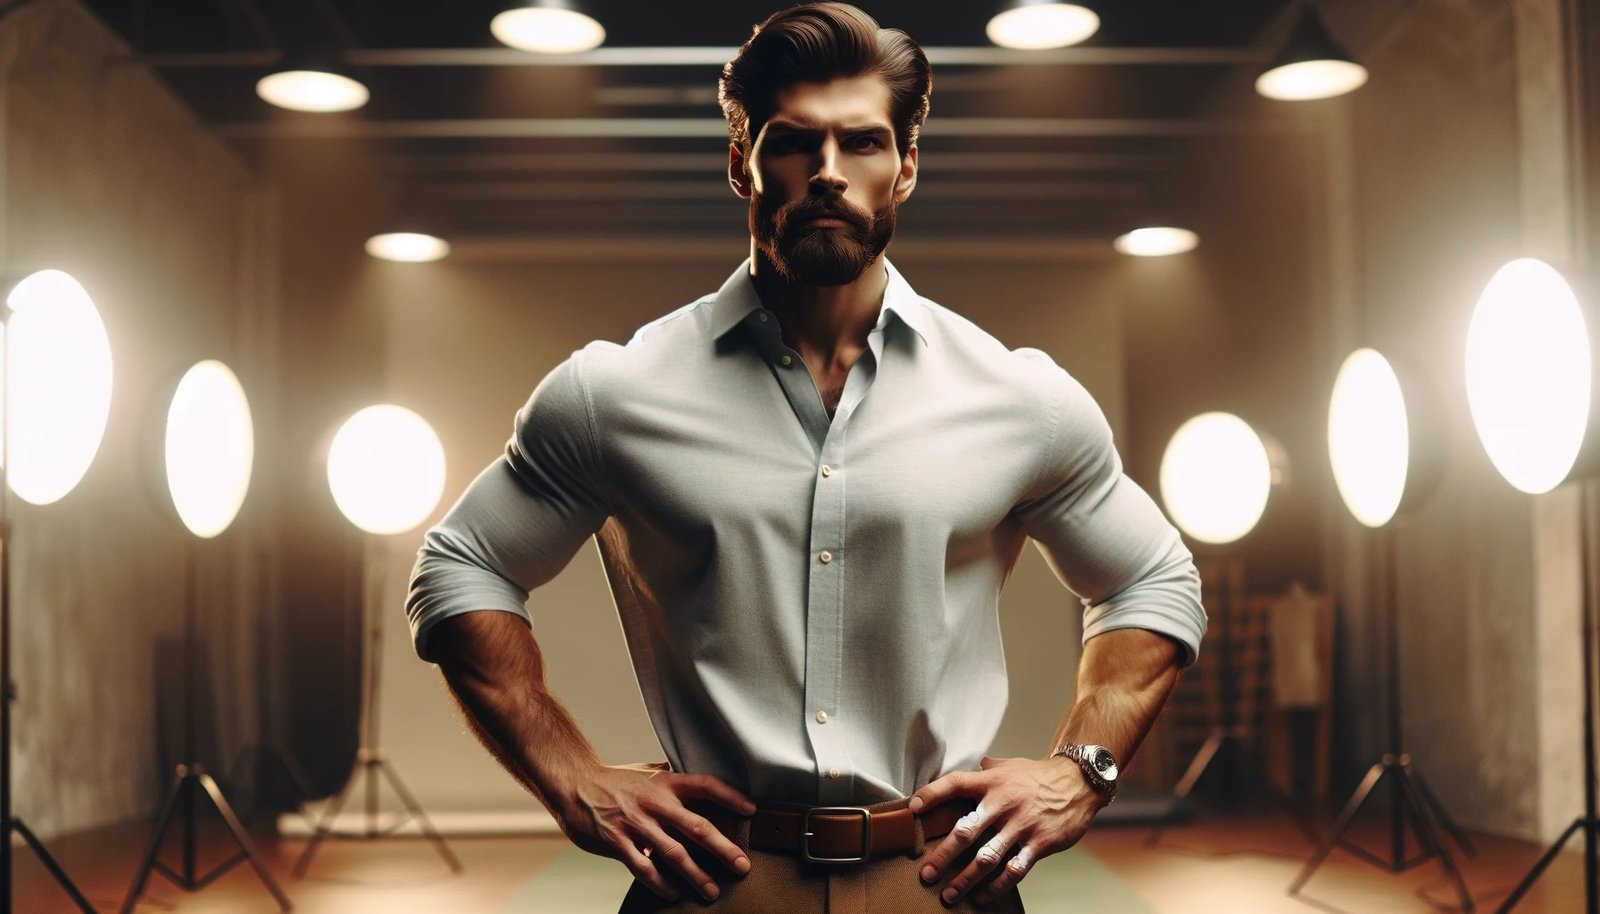 A man portraying masculinity with rugged looks and bulging muscles.